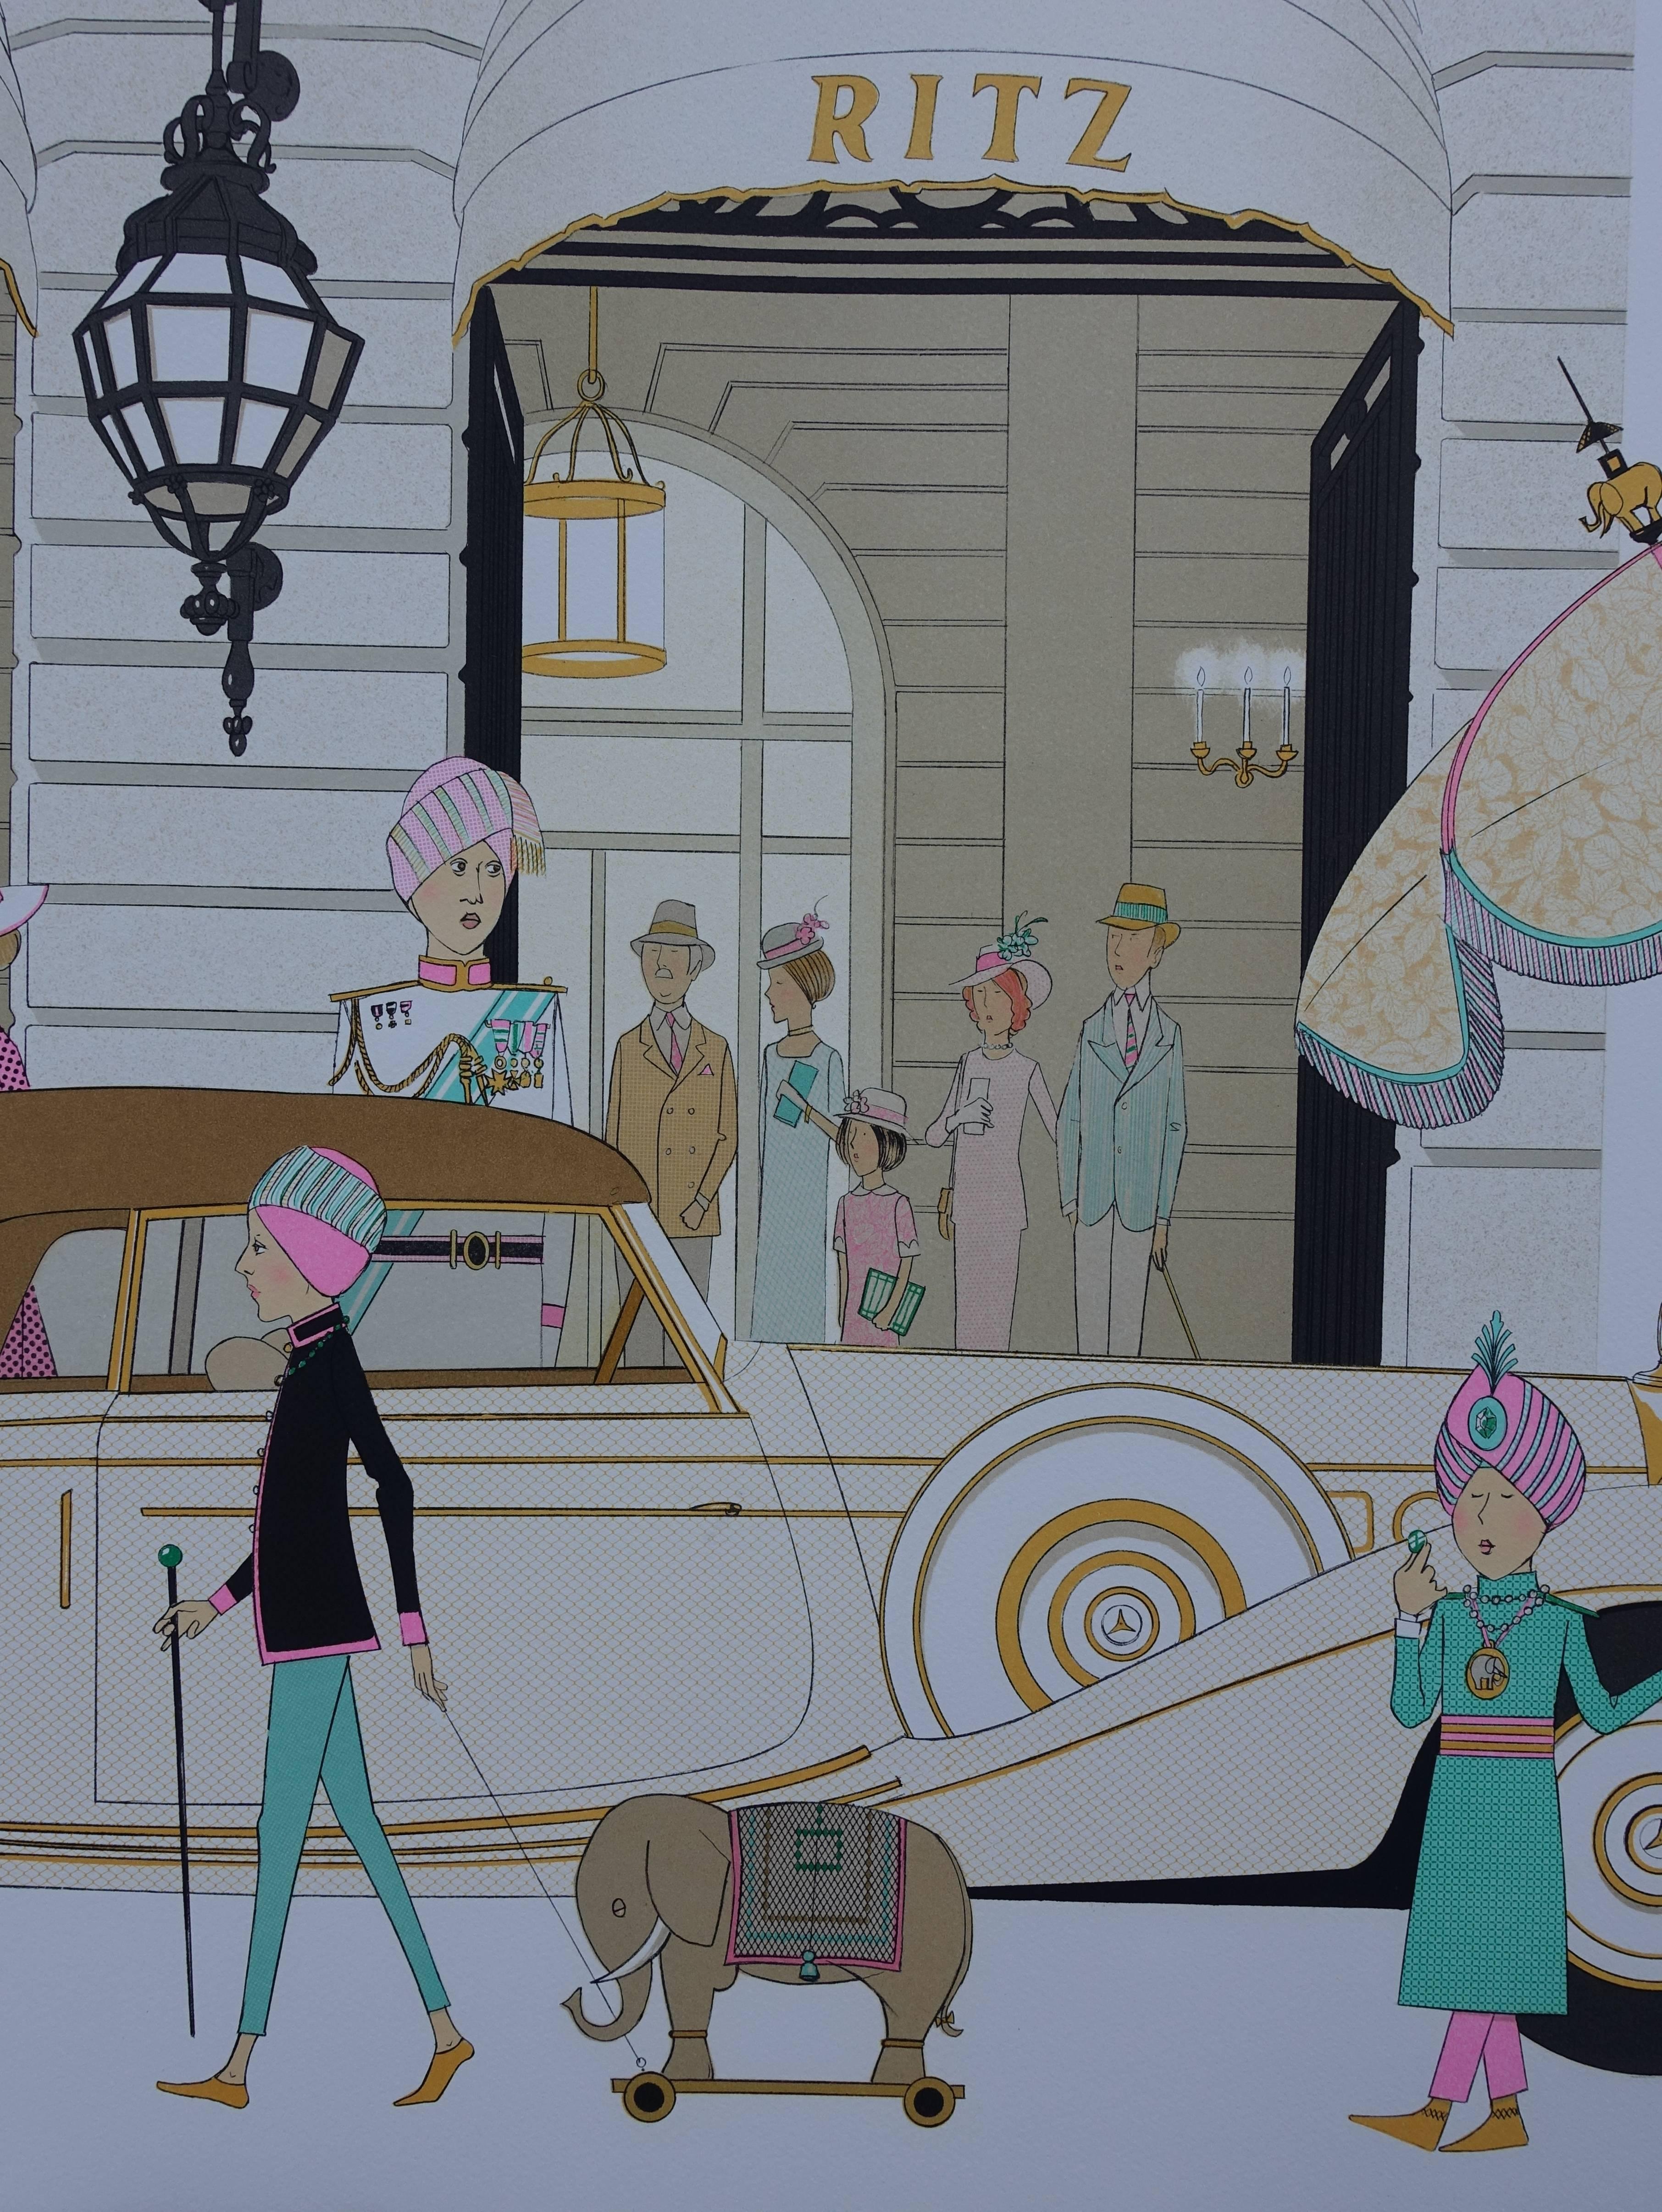 Mercedes Cabriolet 770 and HOTEL RITZ in PARIS - Signed lithograph - 115ex - Art Deco Print by Denis Paul Noyer